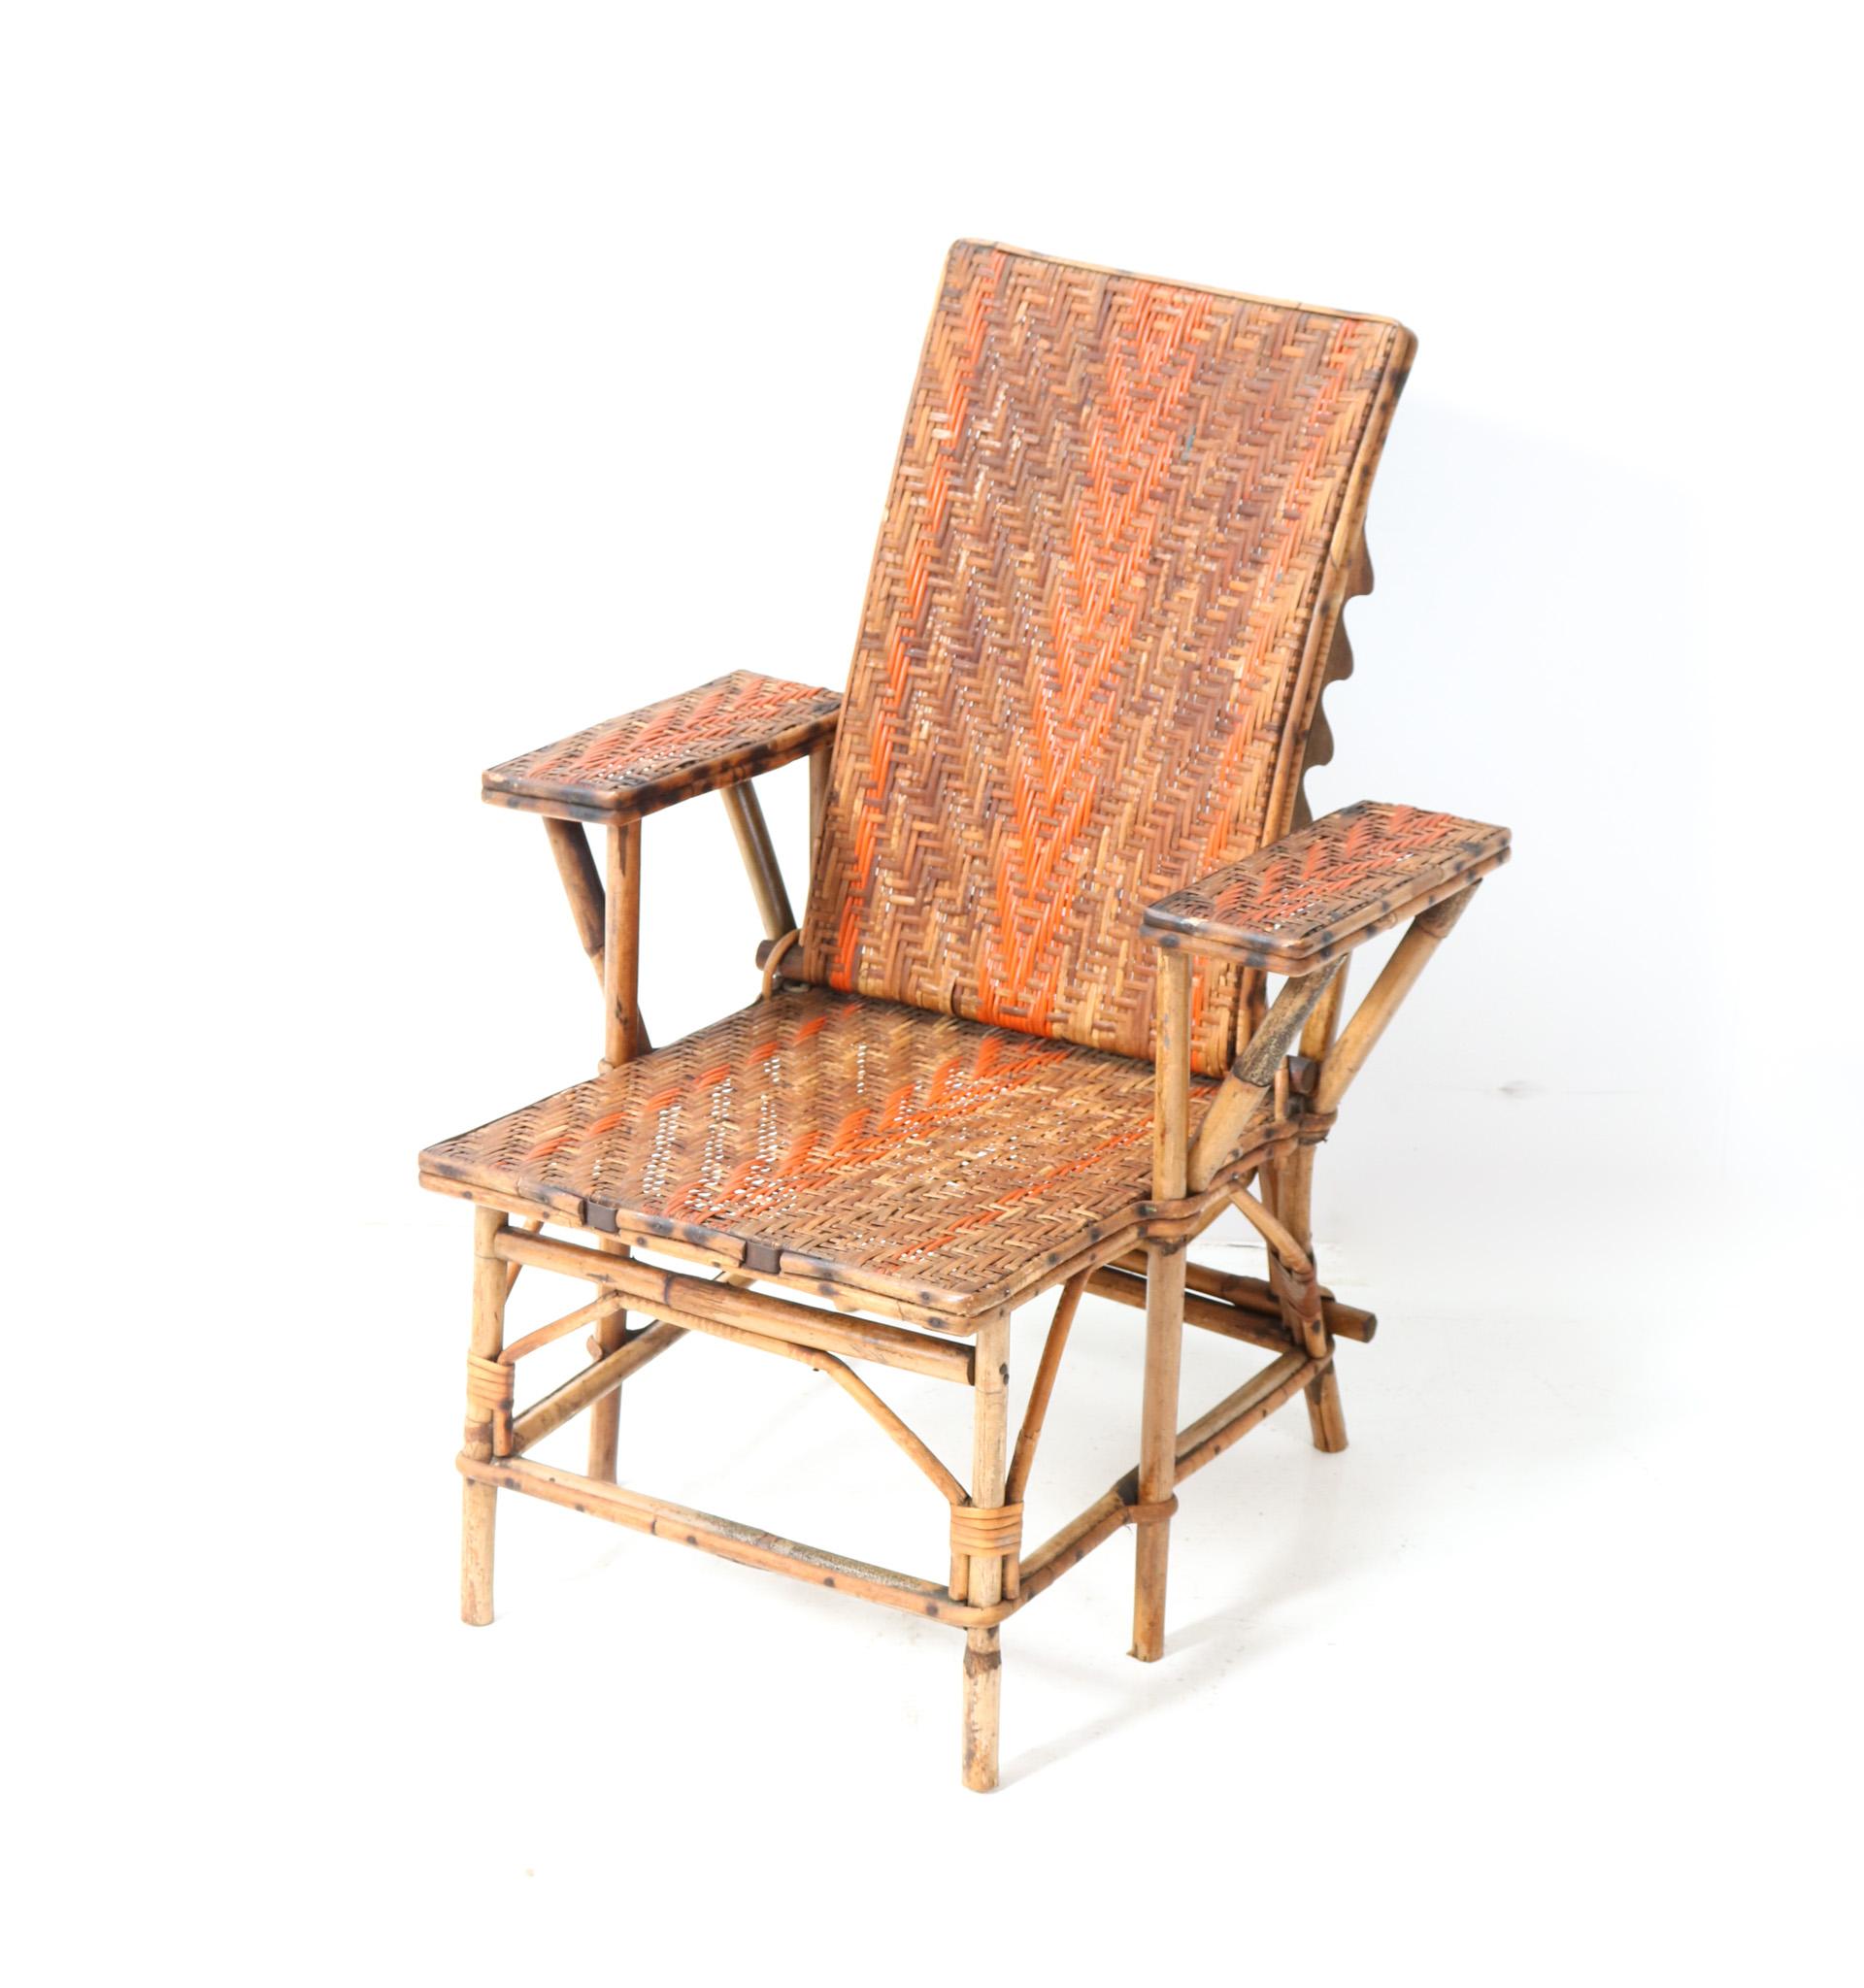 Rattan Art Nouveau Children's Folding Deck Chair or Lounge Chair, 1900s In Good Condition For Sale In Amsterdam, NL